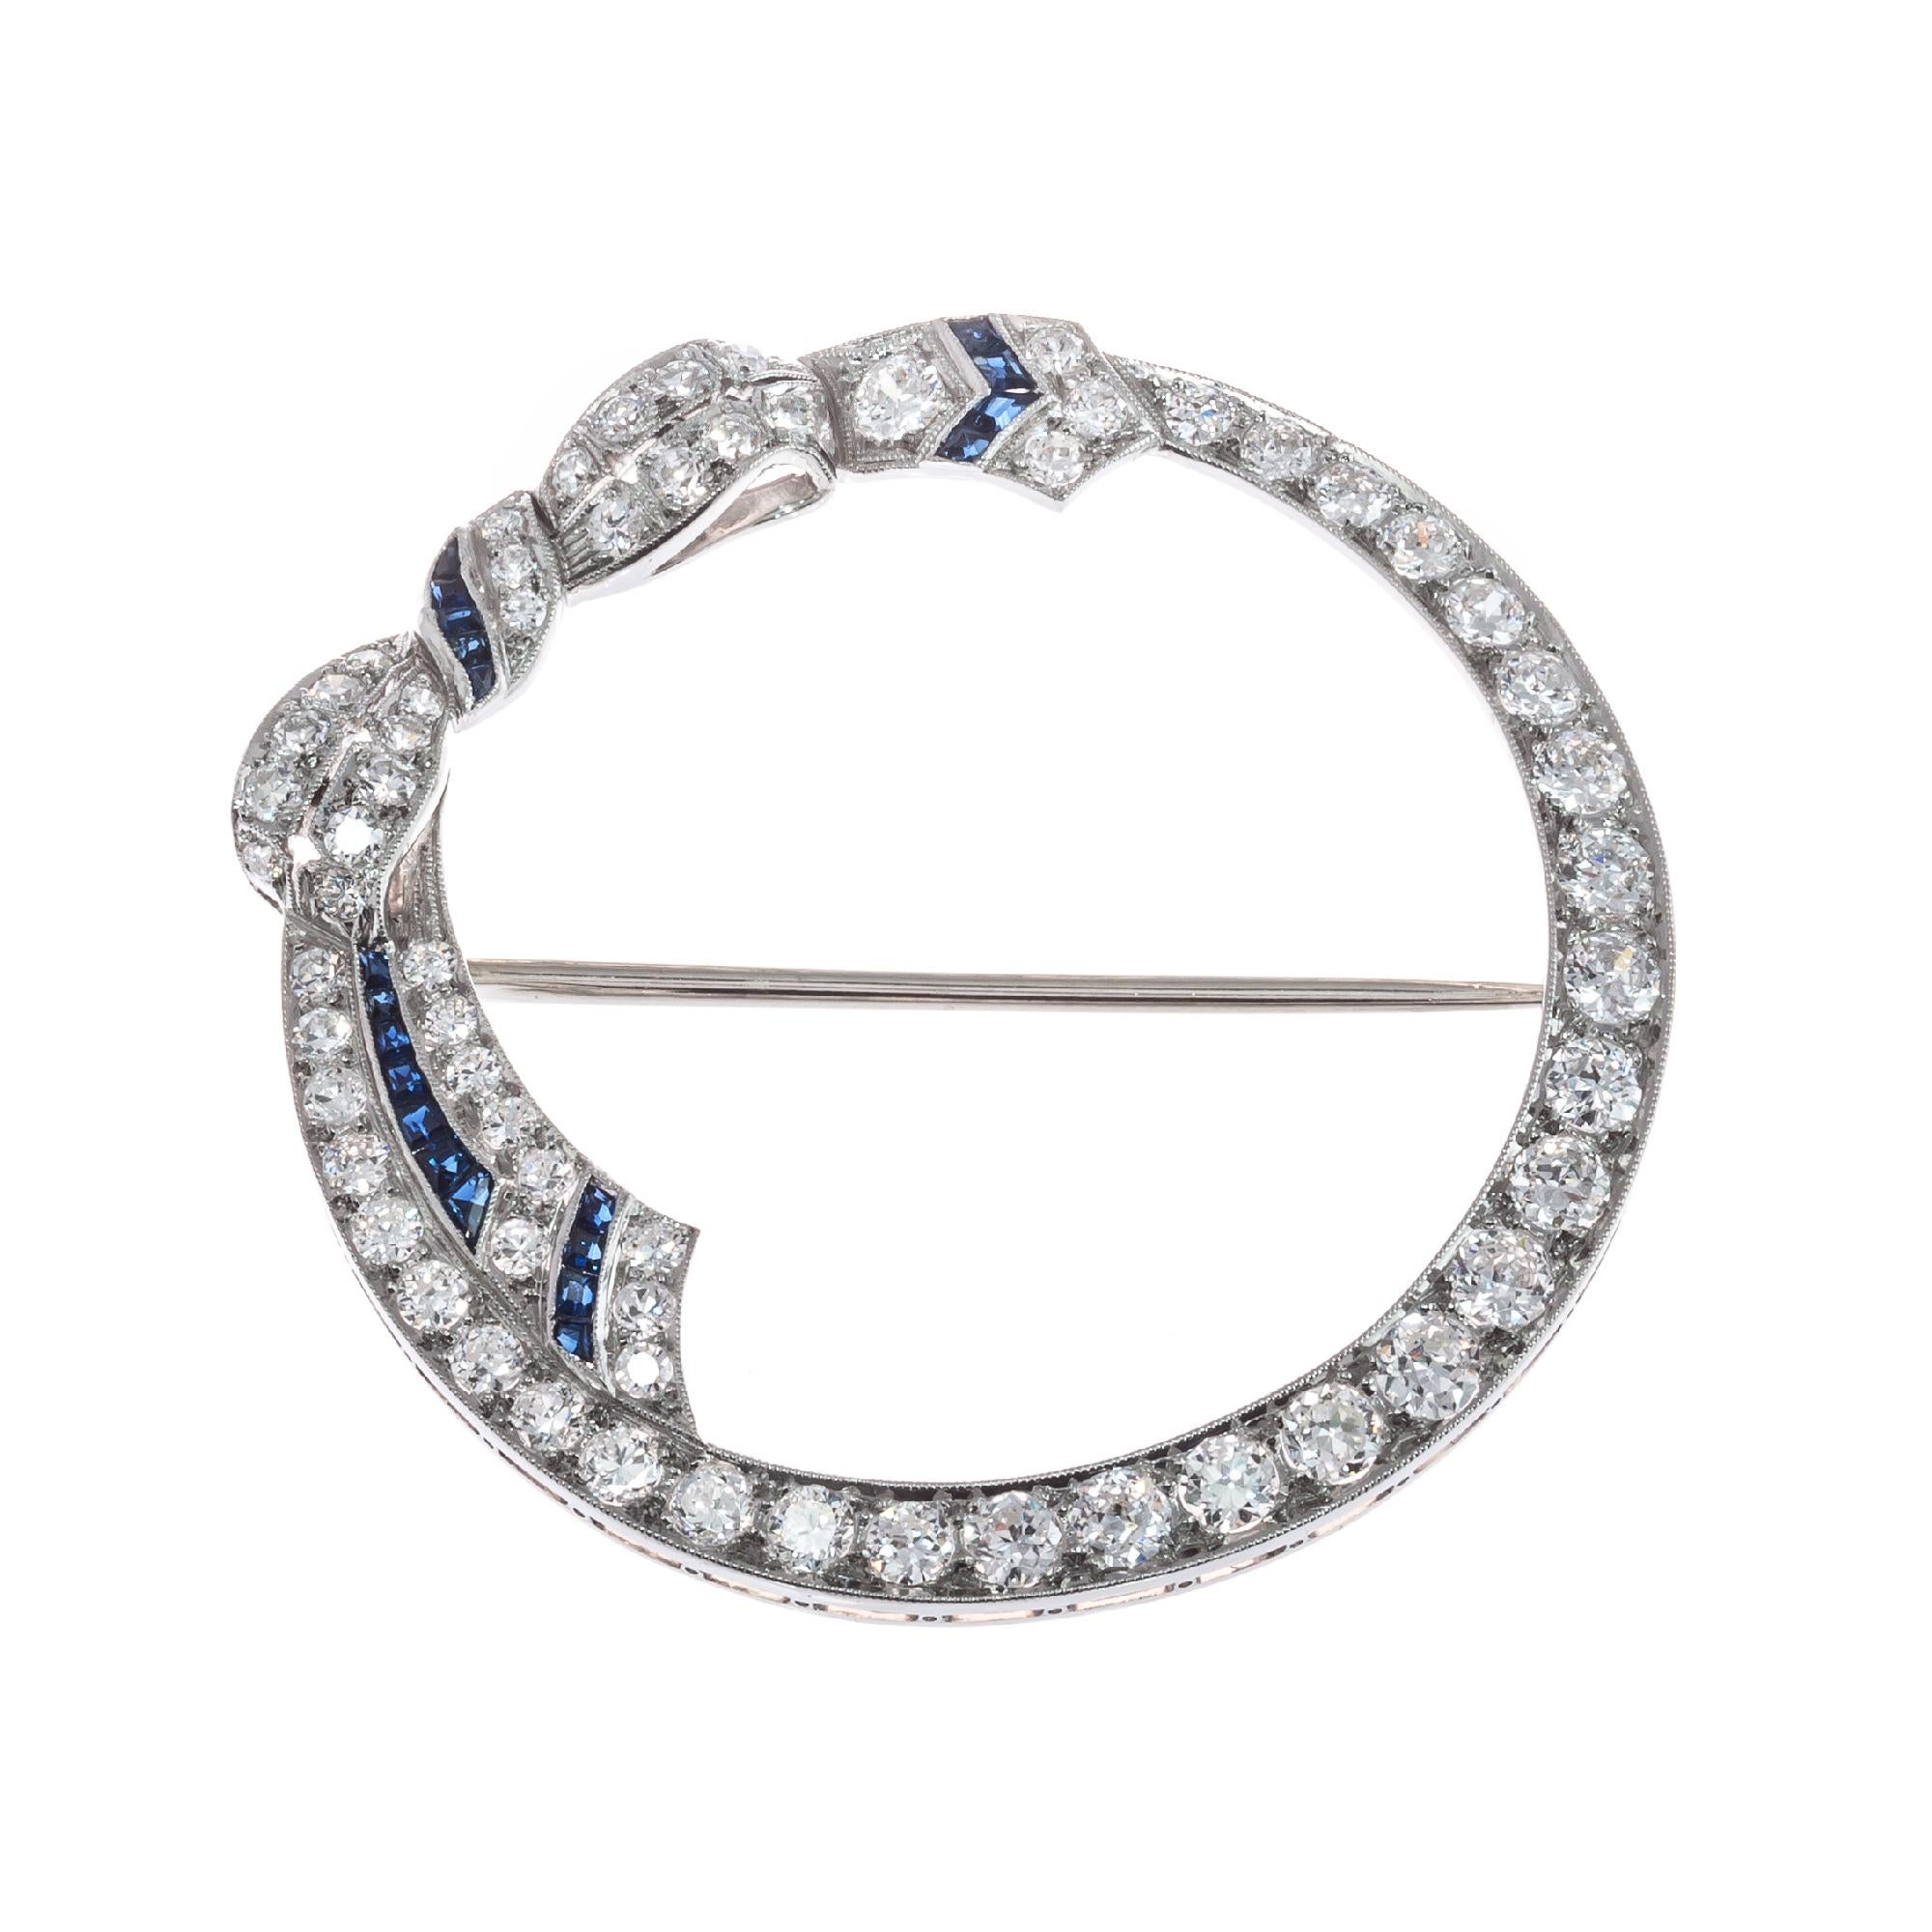 Diamond and sapphire bow open circle brooch. Platinum circle with 14k white gold stem and catch. Bright sparkly old European cut diamonds with square cut accent sapphires. 

63 old European cut H-I VS2-SI2 diamonds, Approximate 2.00cts 
20 square